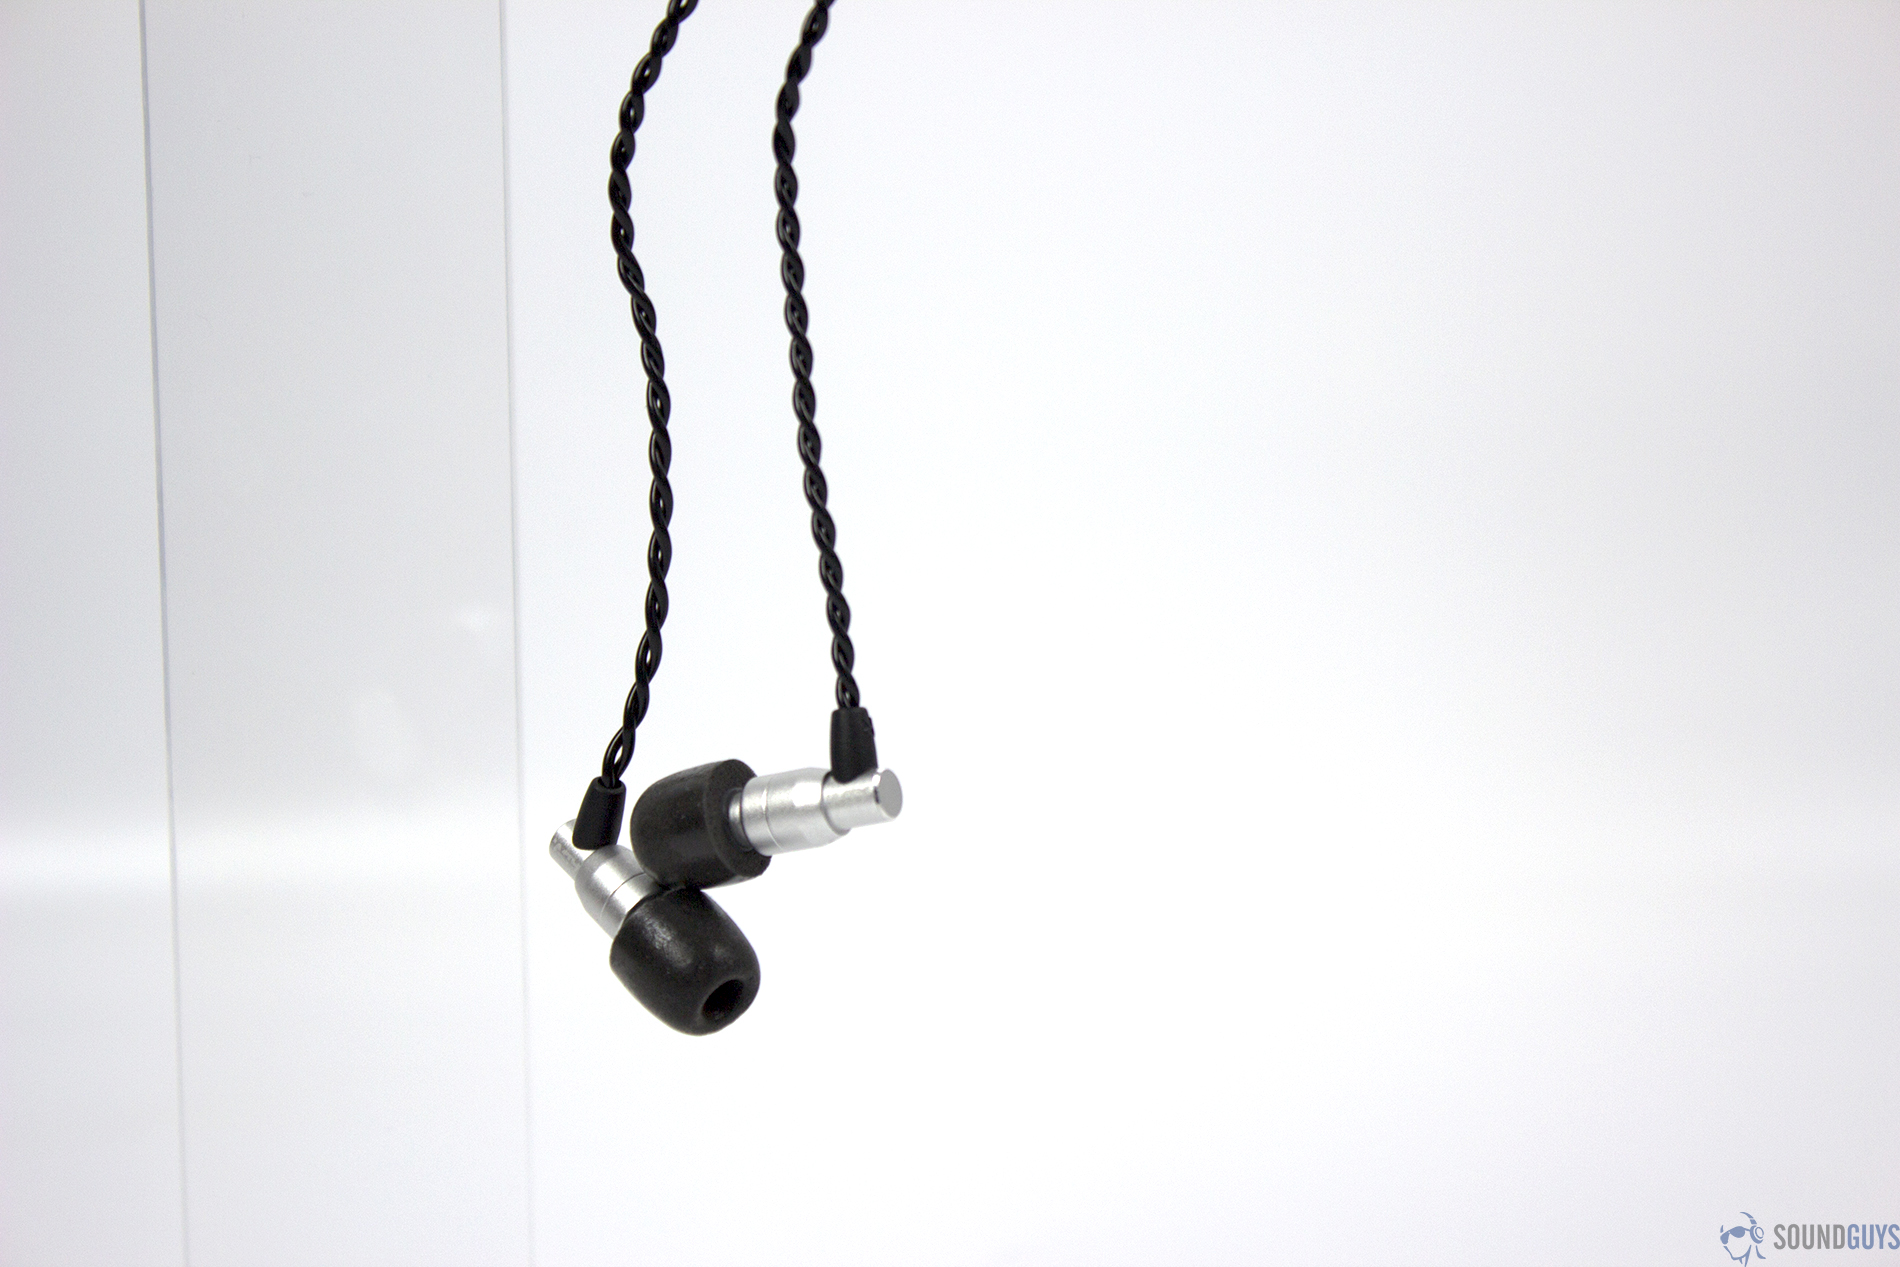 The ADV.SoundM4 earbuds hanging down vertically on the left third of the image.